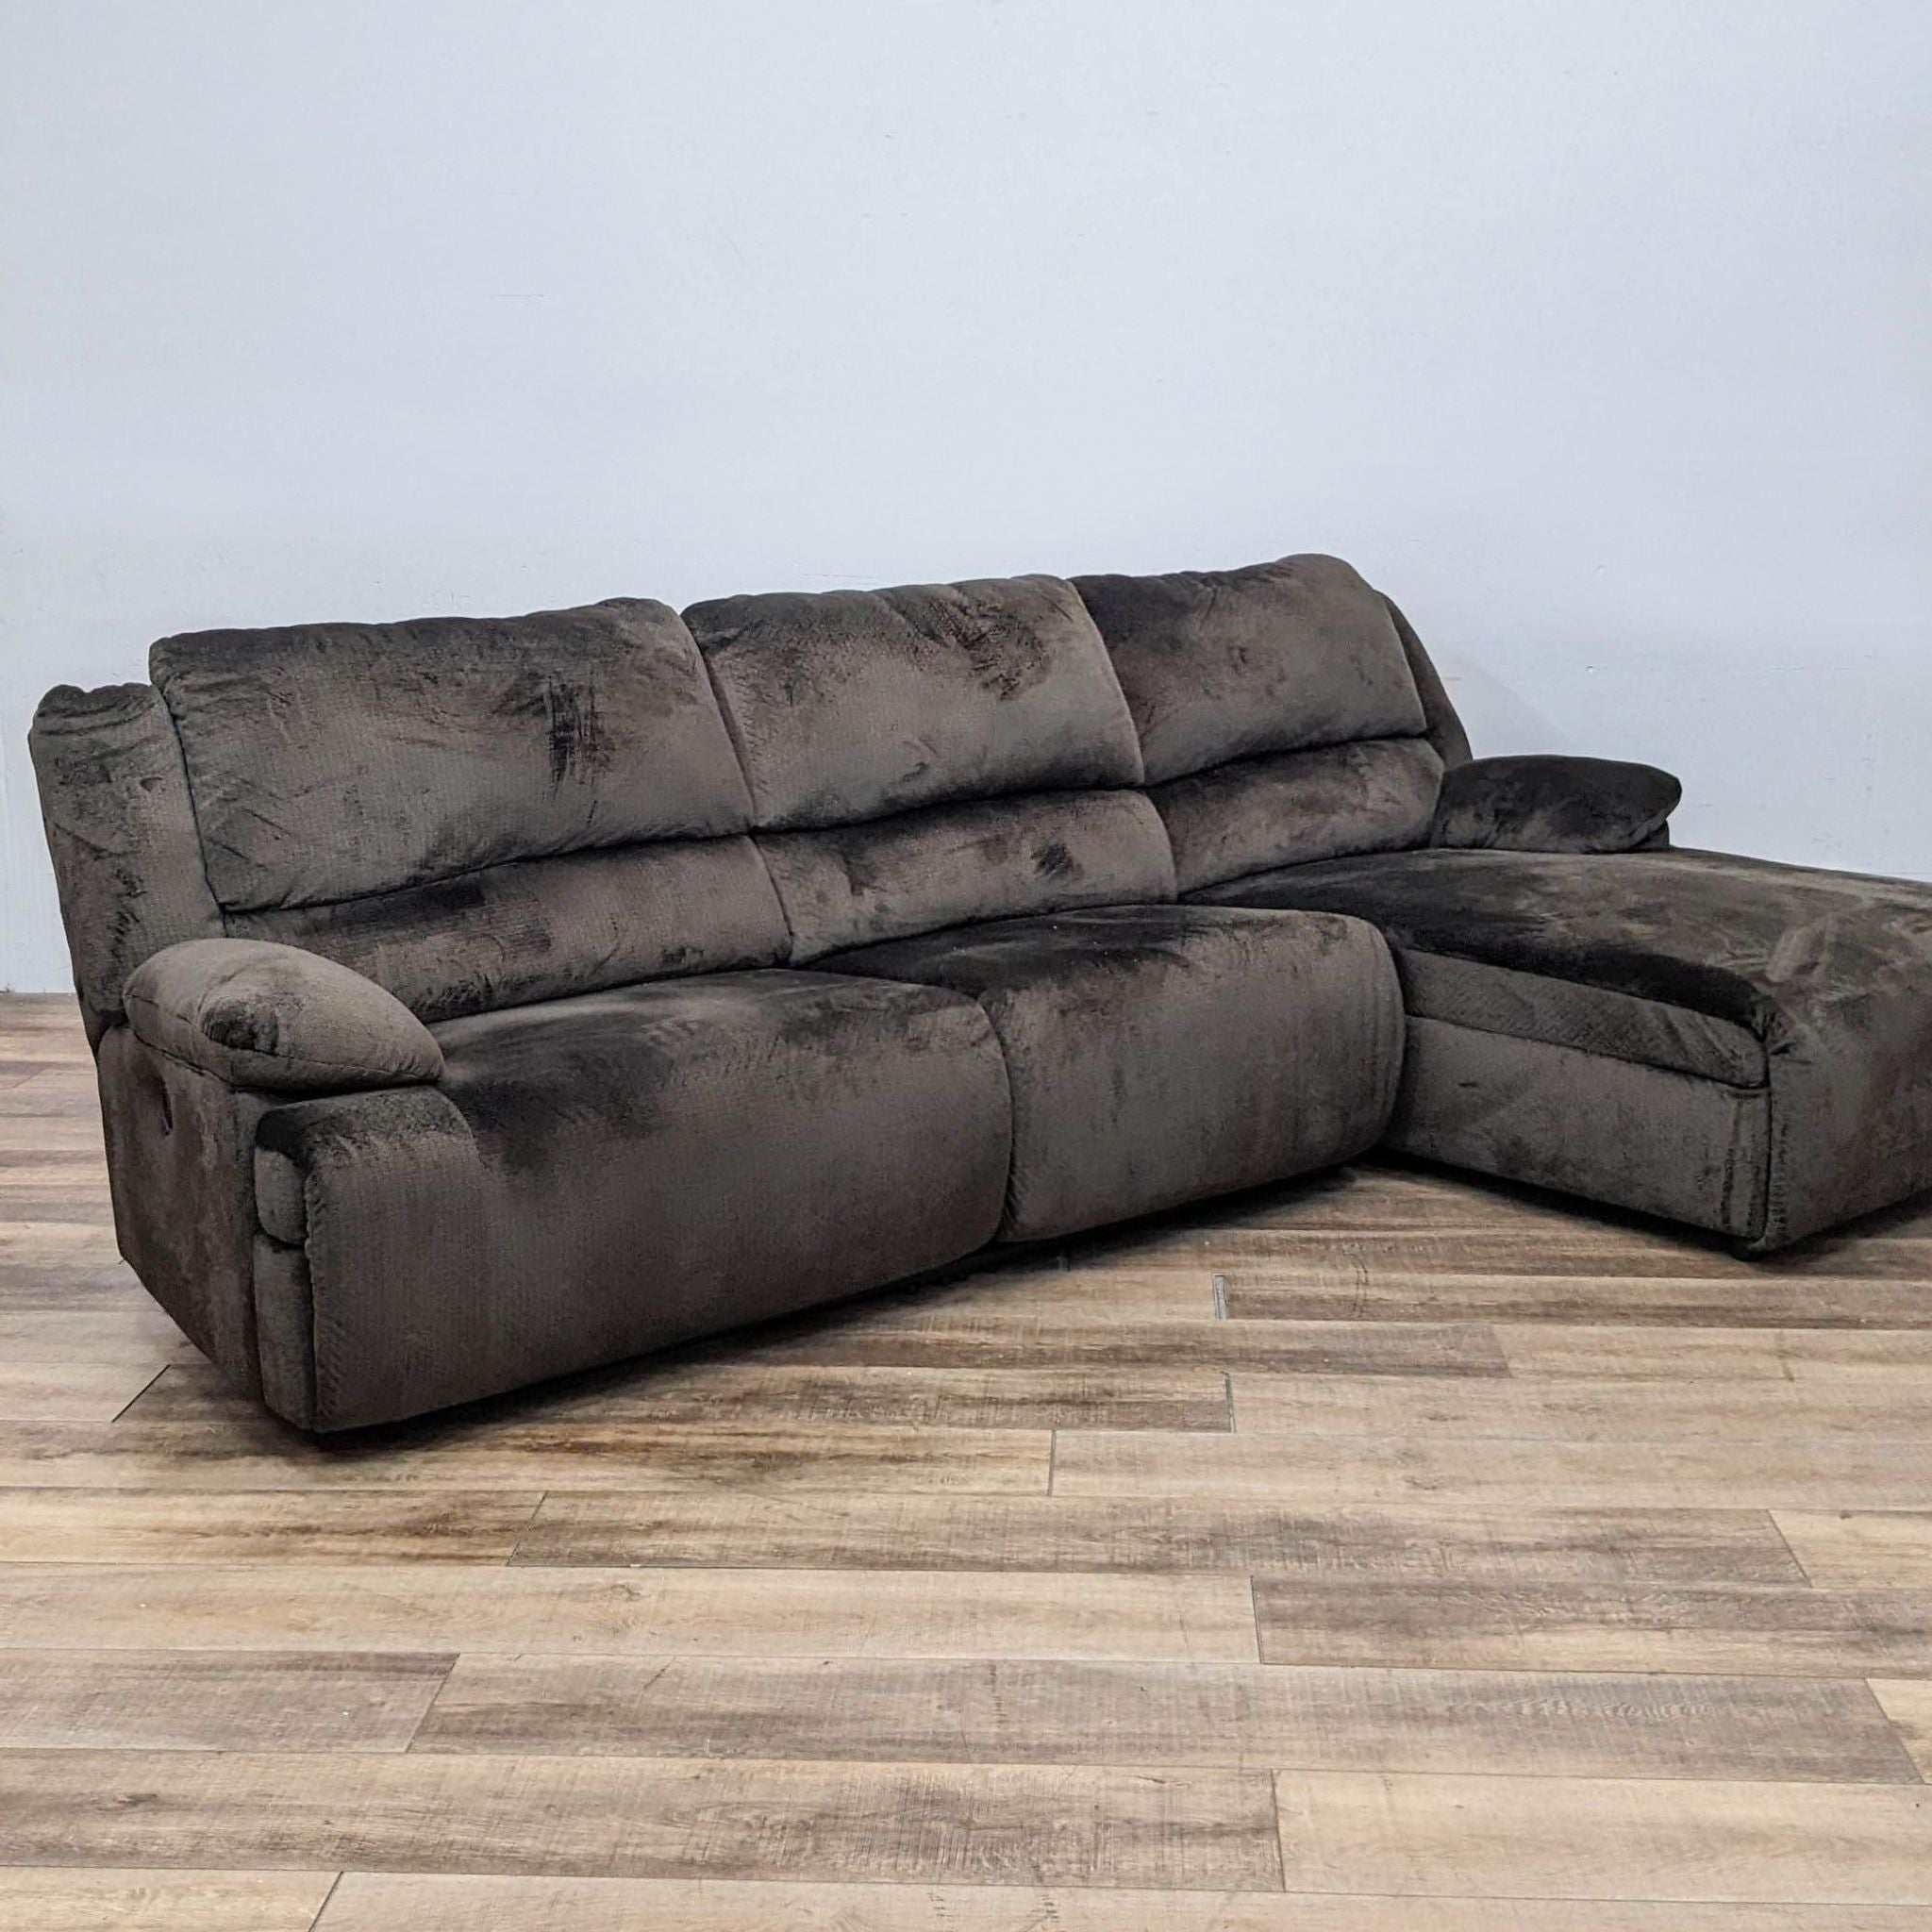 Alt text 1: Brown Reperch brand fabric sectional with a reclined end and a chaise lounge in a room with wooden flooring.